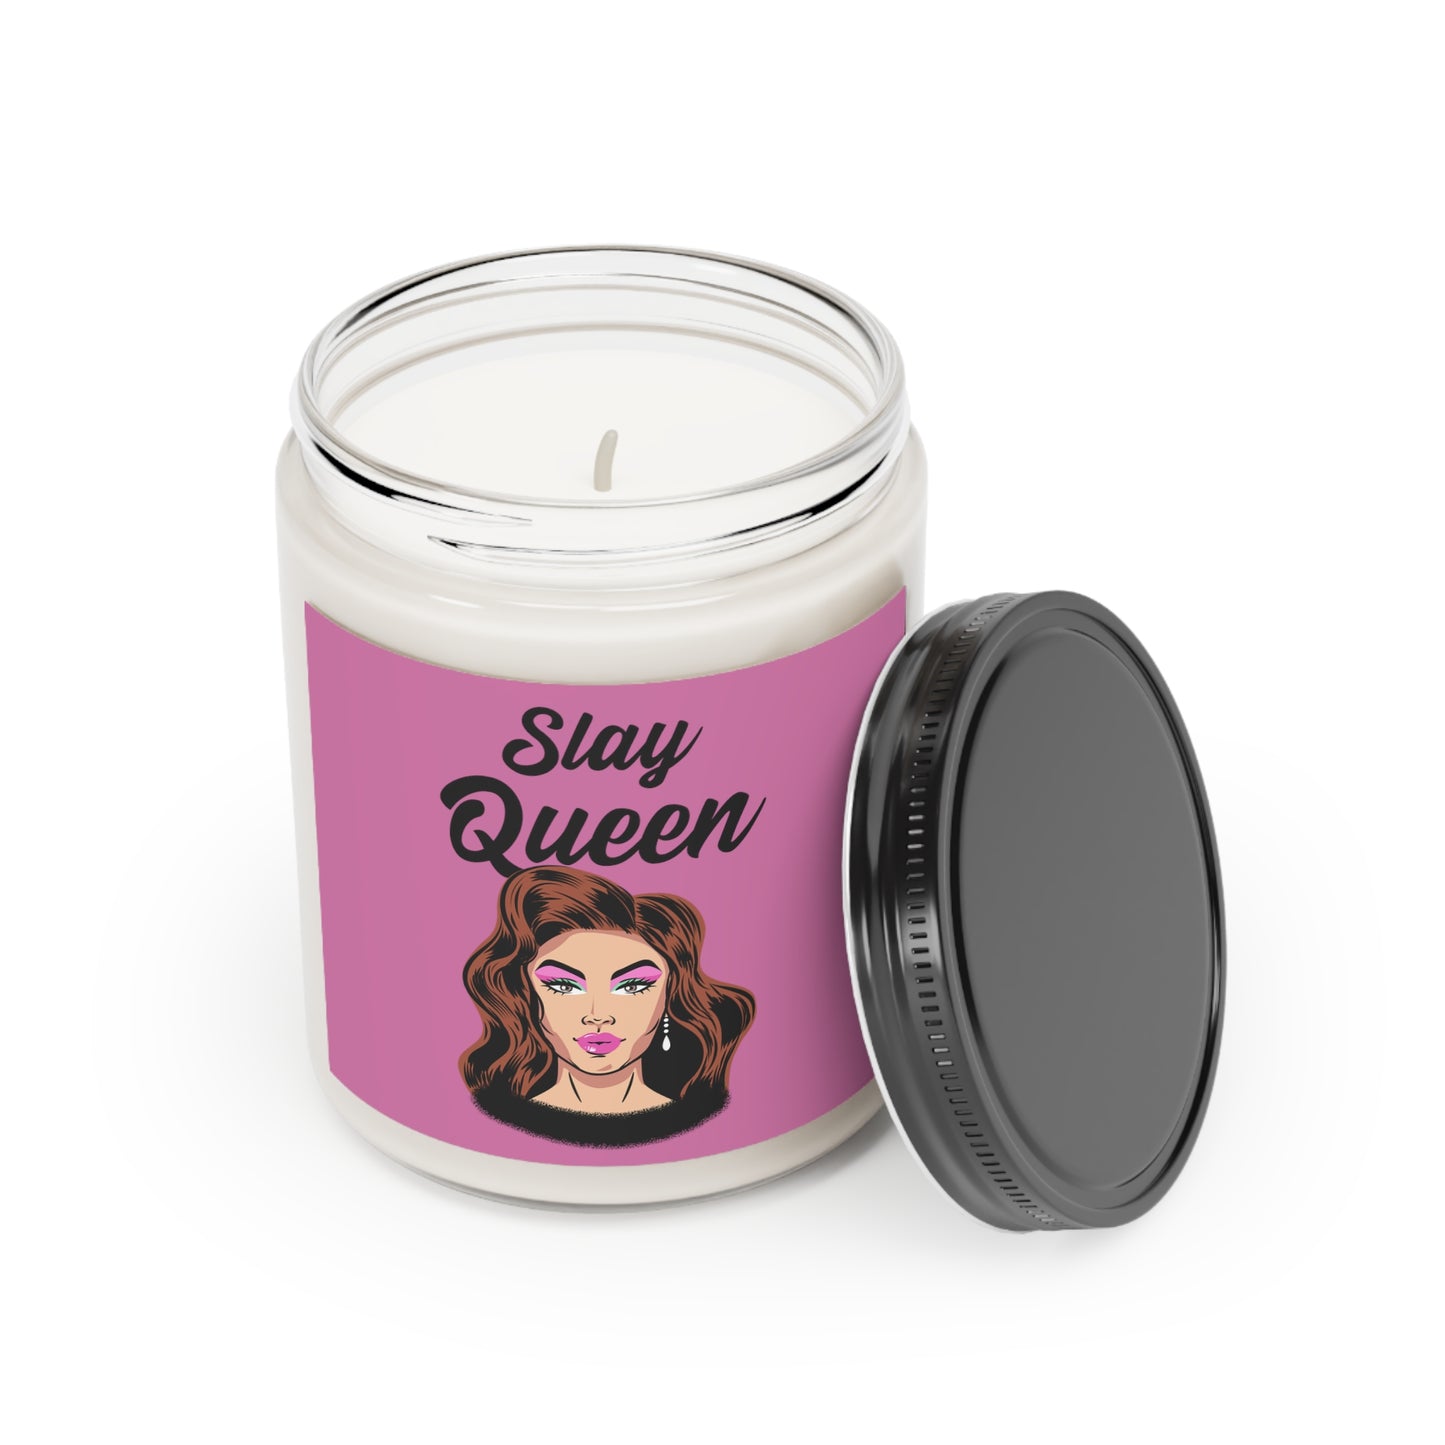 Slay Queen Scented Candle